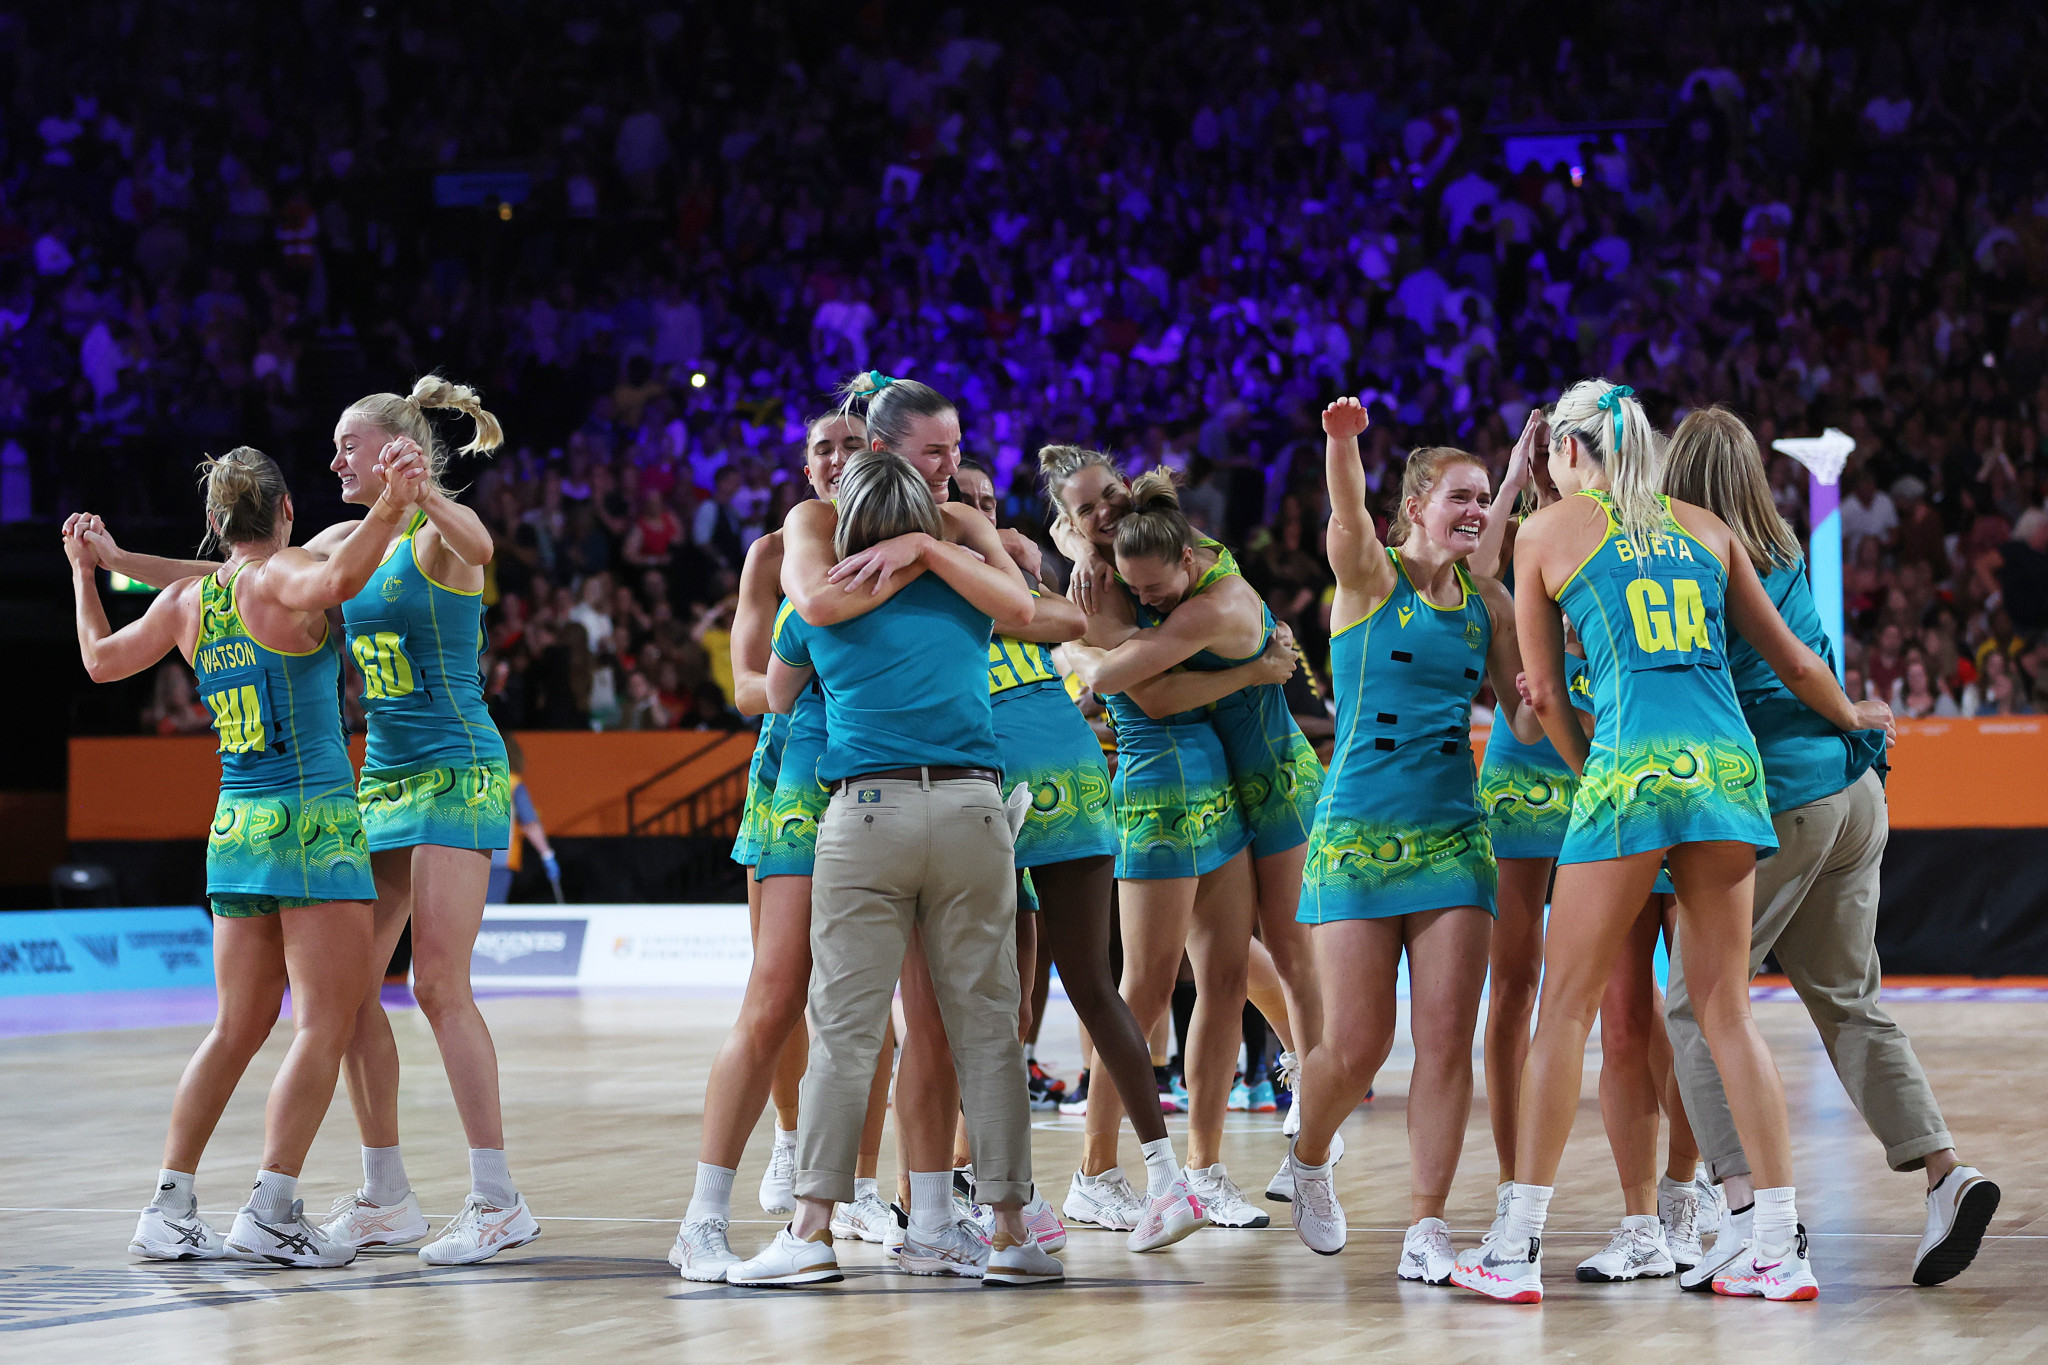 Australia won a thrilling netball final at Birmingham 2022 by four goals against Jamaica ©Getty Images